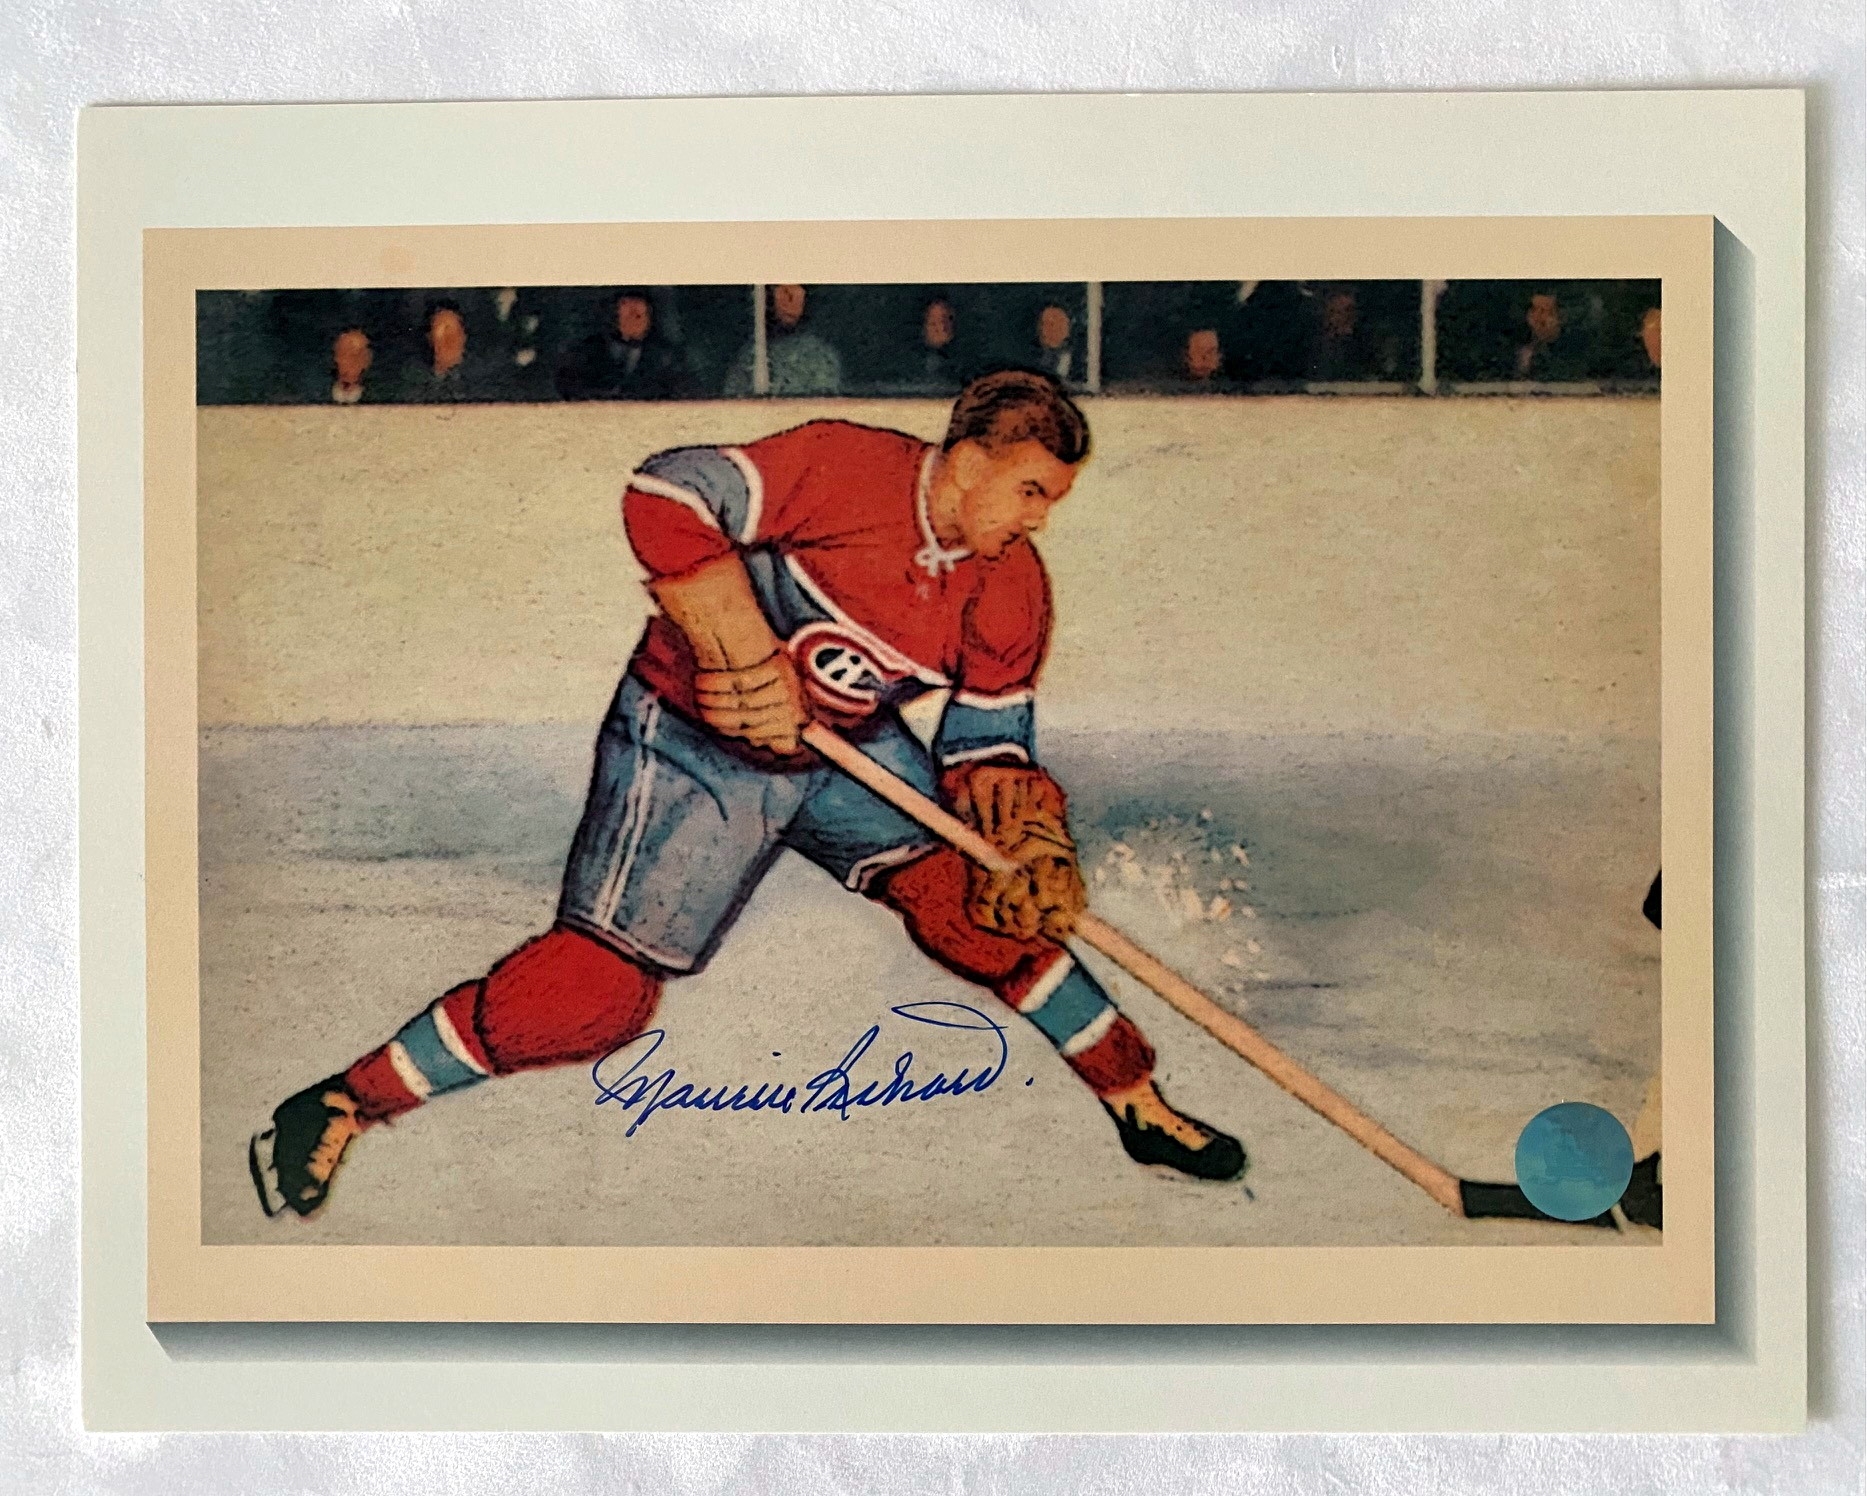 Maurice Richard Montreal Canadiens Signed Parkhurst Card 8x10 Photo